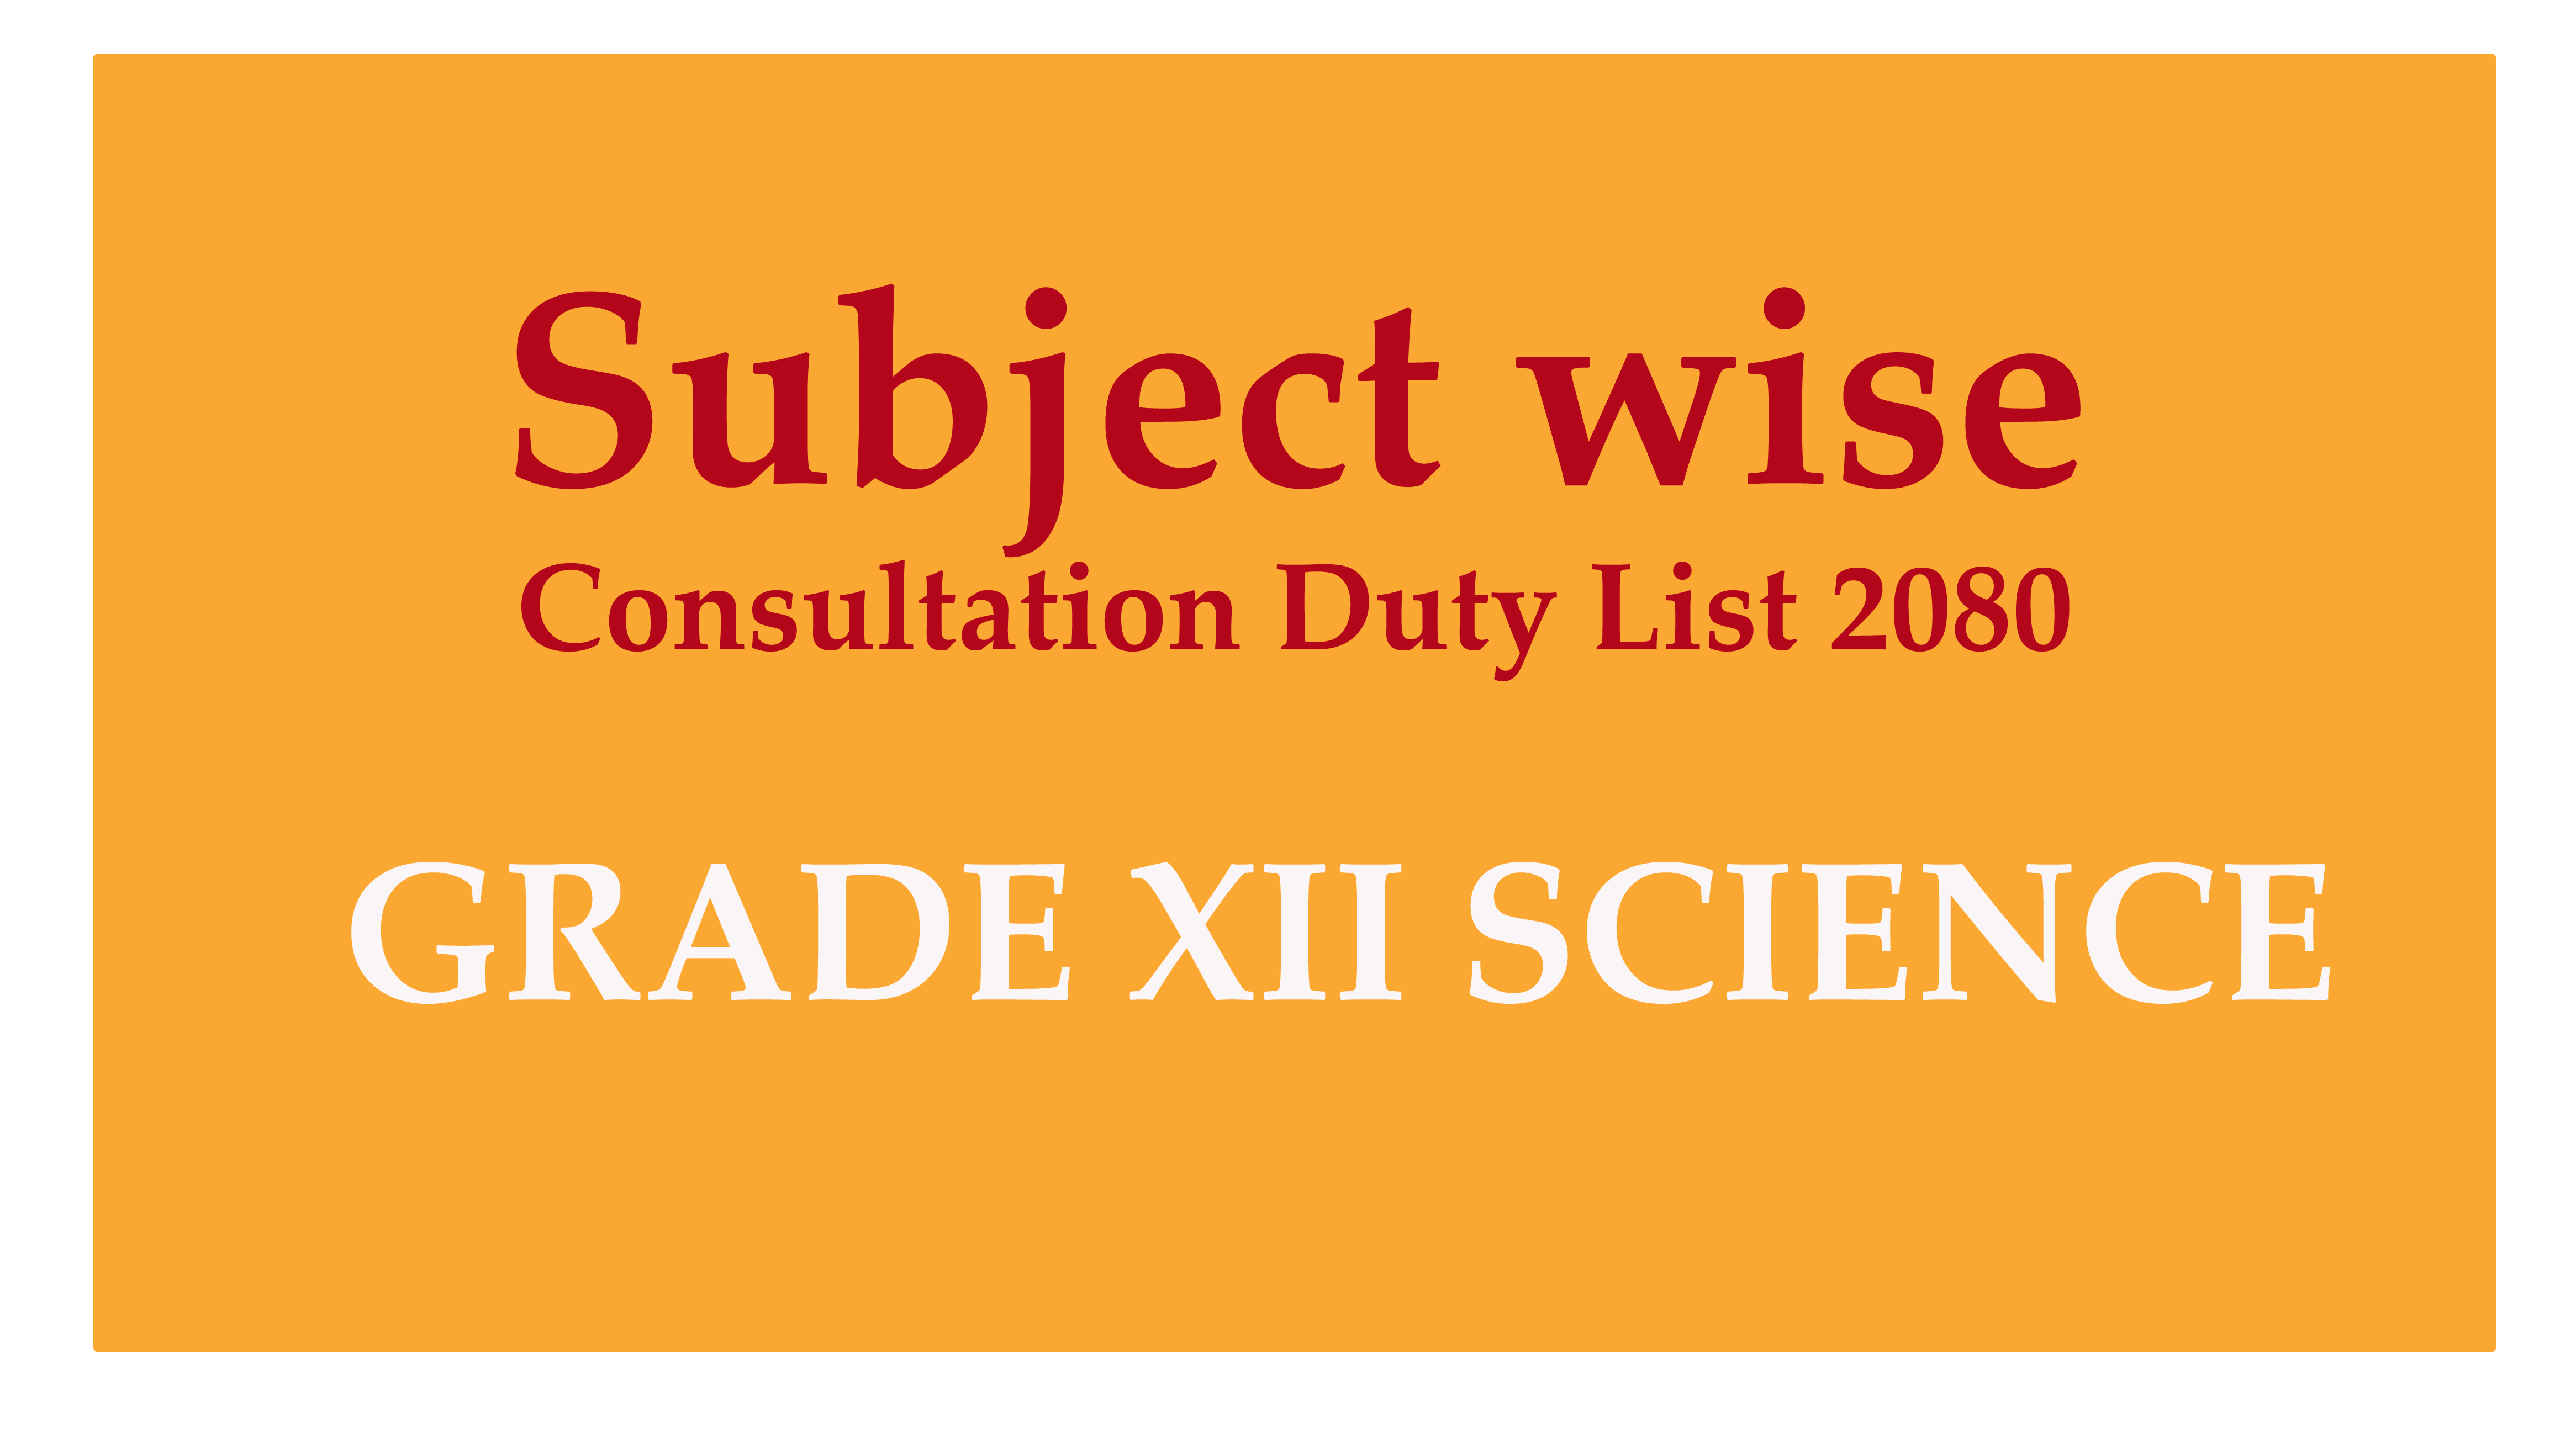 Subject wise Consultation Duty List - Grade XII